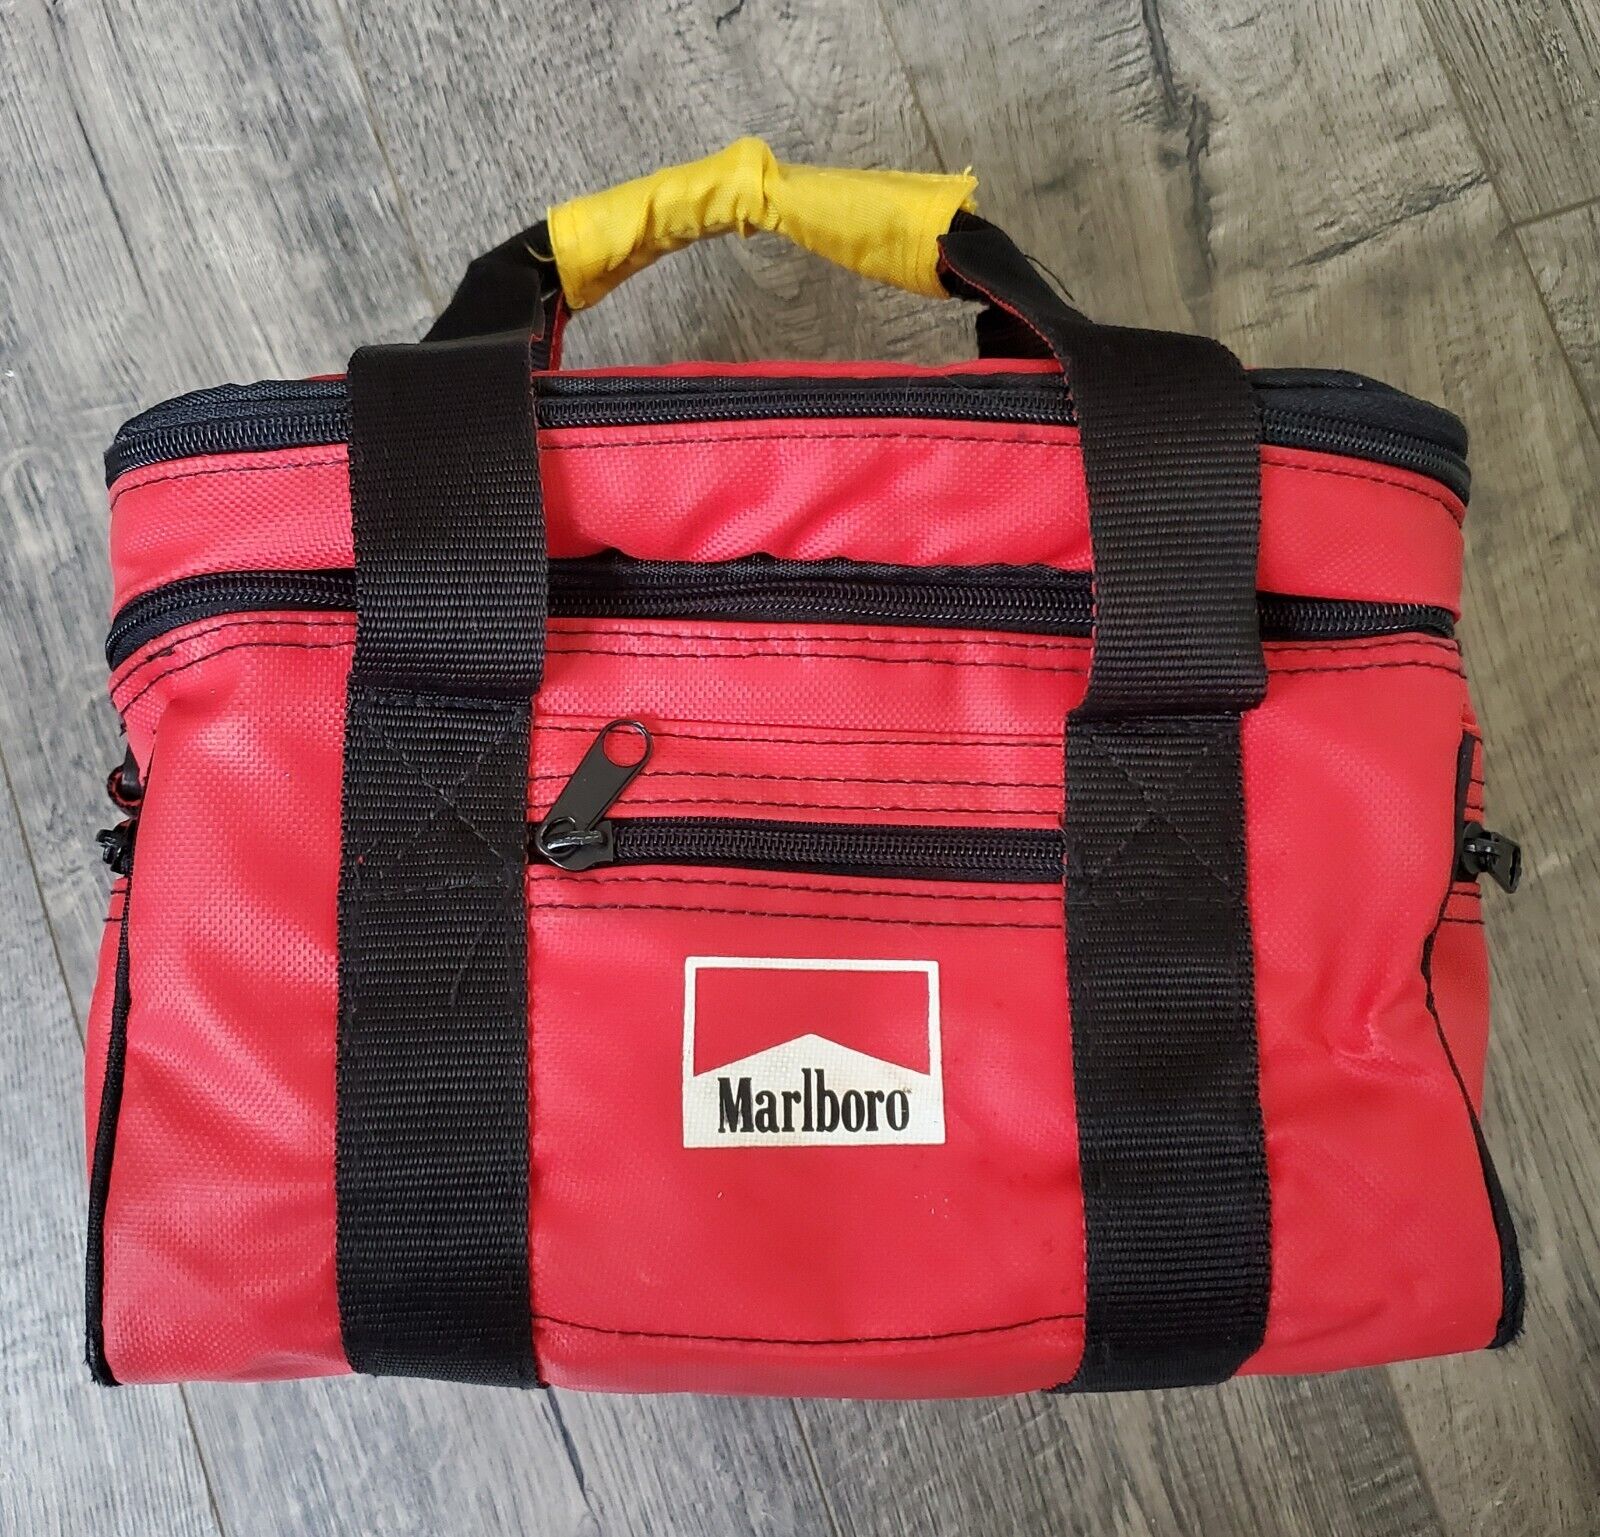 Vintage Marlboro Insulated Red Lunchbox Lunch Bag Travel Food Drink Cooler